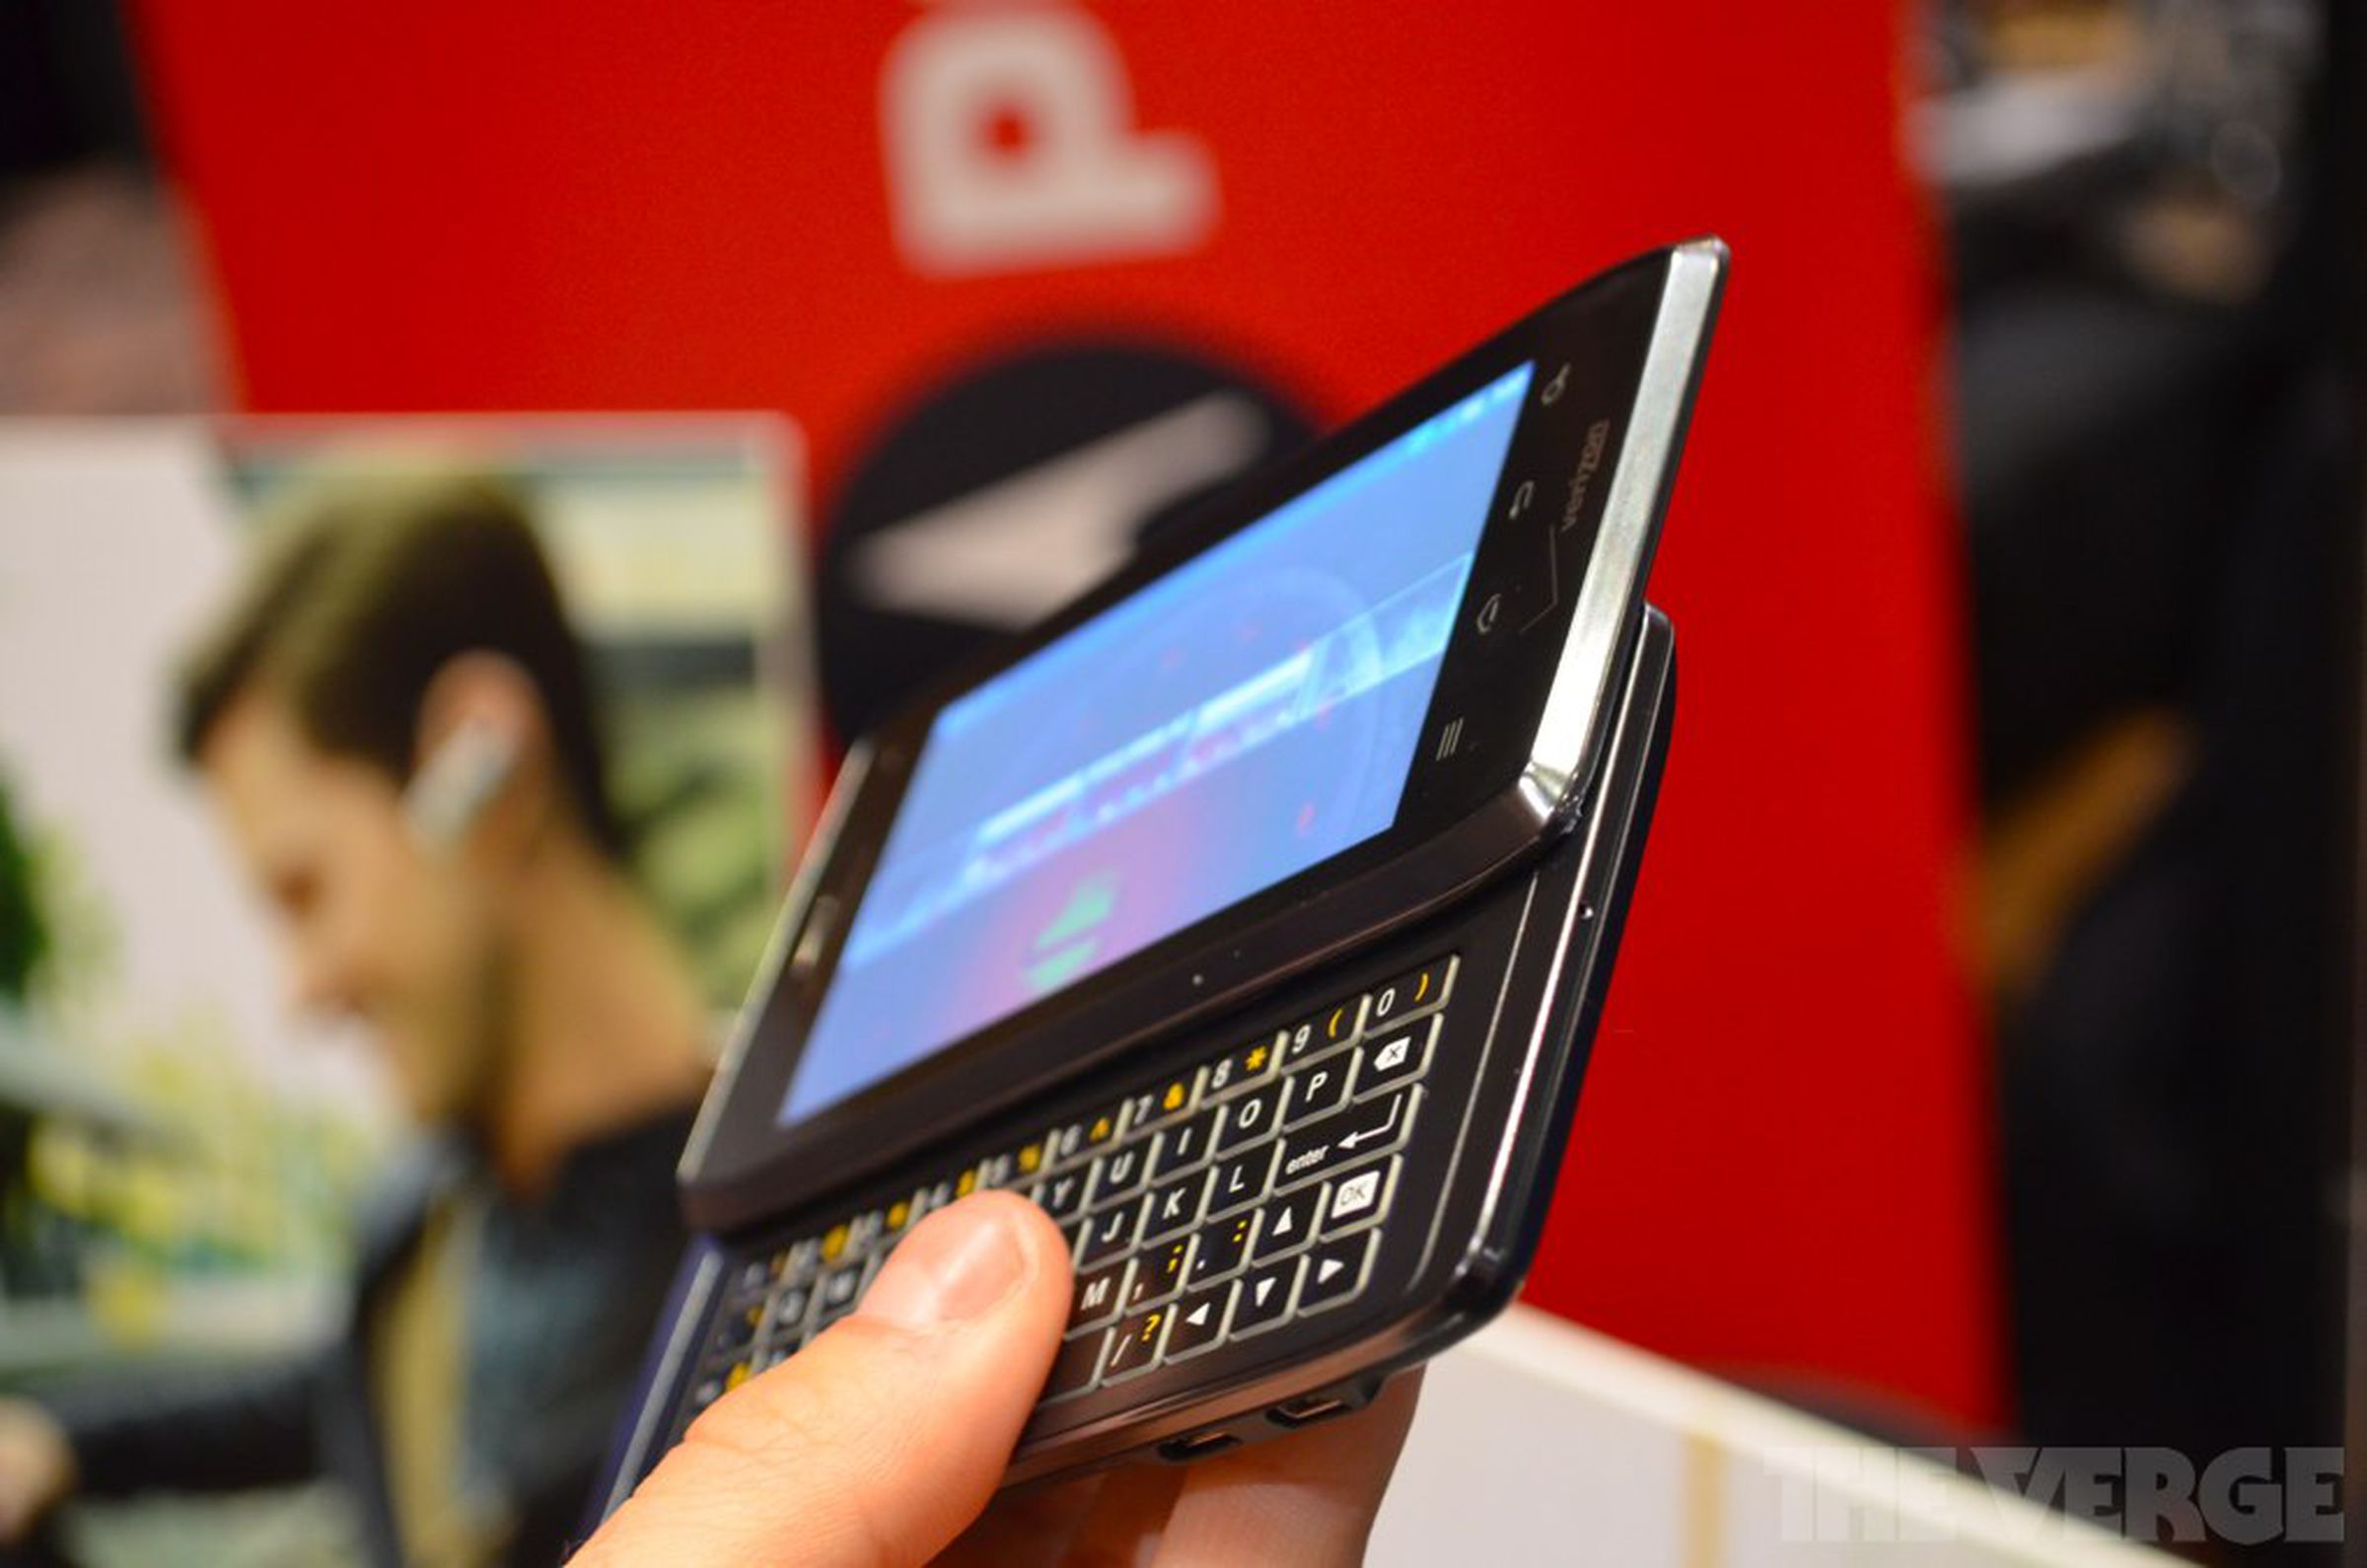 Motorola Droid 4 hands-on pictures